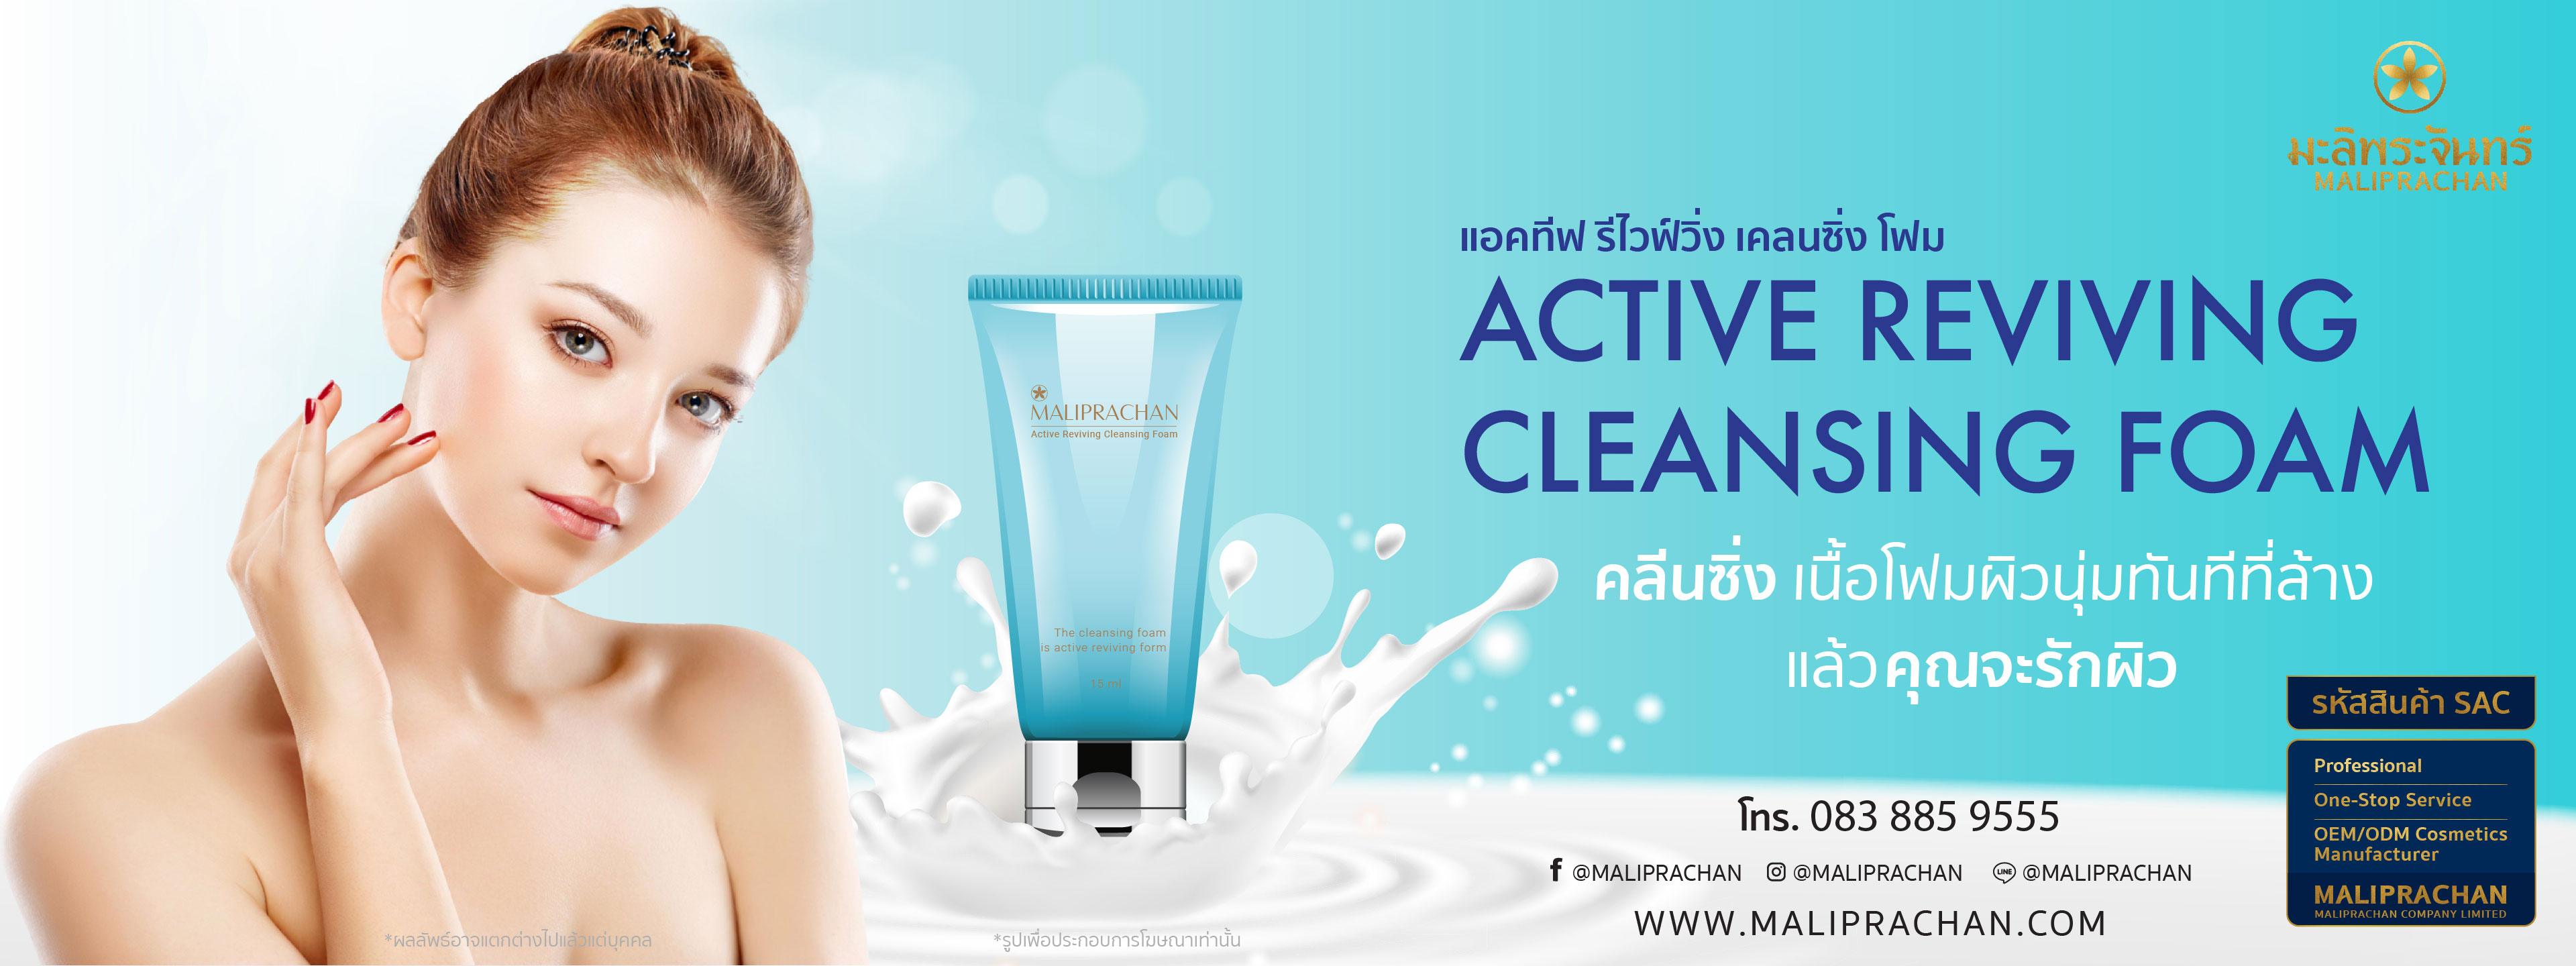 Active Reviving Cleansing Foam